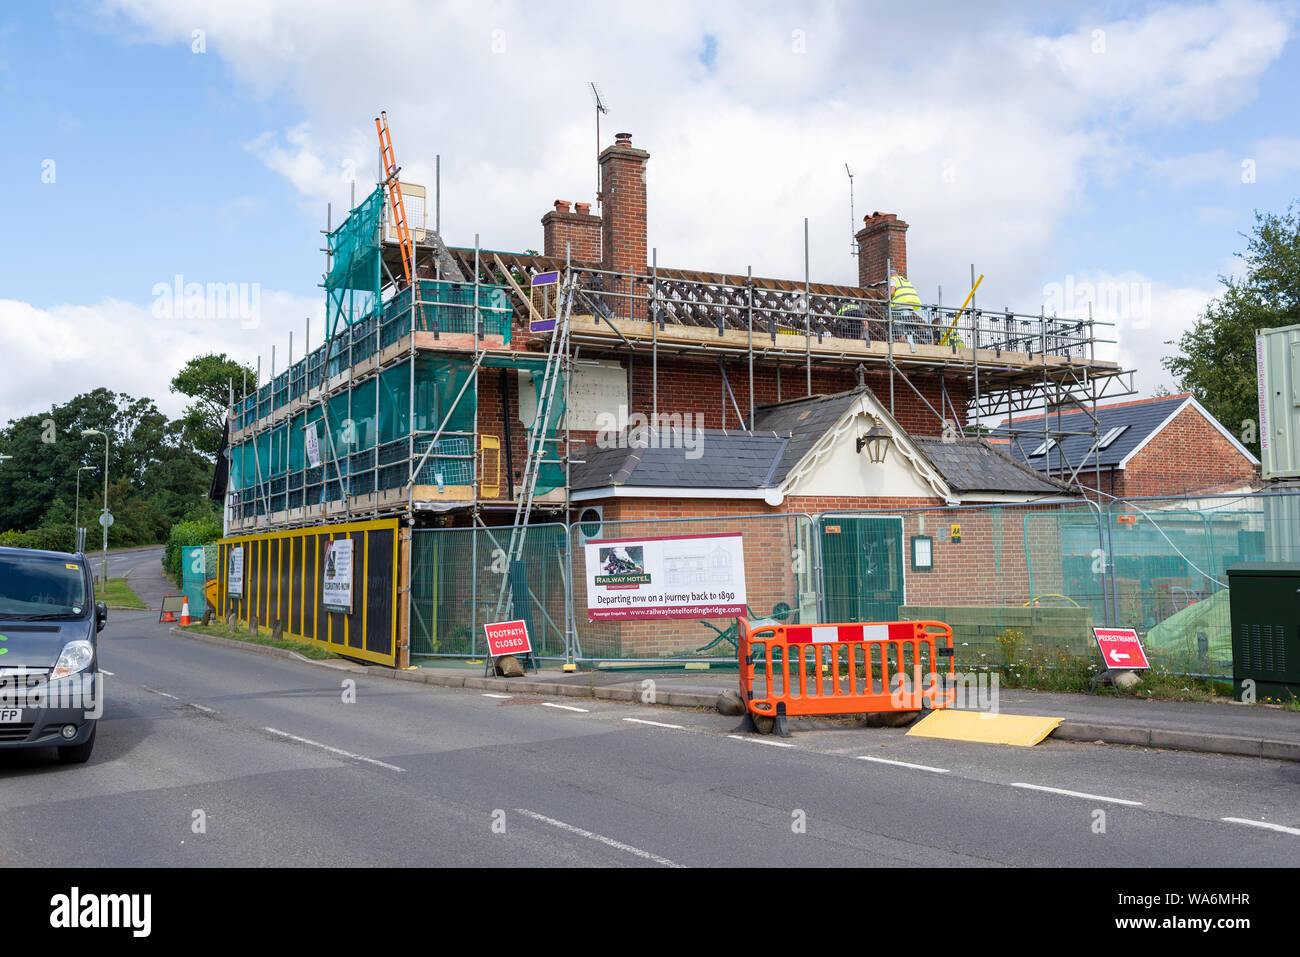 Refurbishment and partial rebuild of The Augustus John public house, Station Road, Fordingbridge, Hampshire before a relaunch as The Railway Hotel. Stock Photo